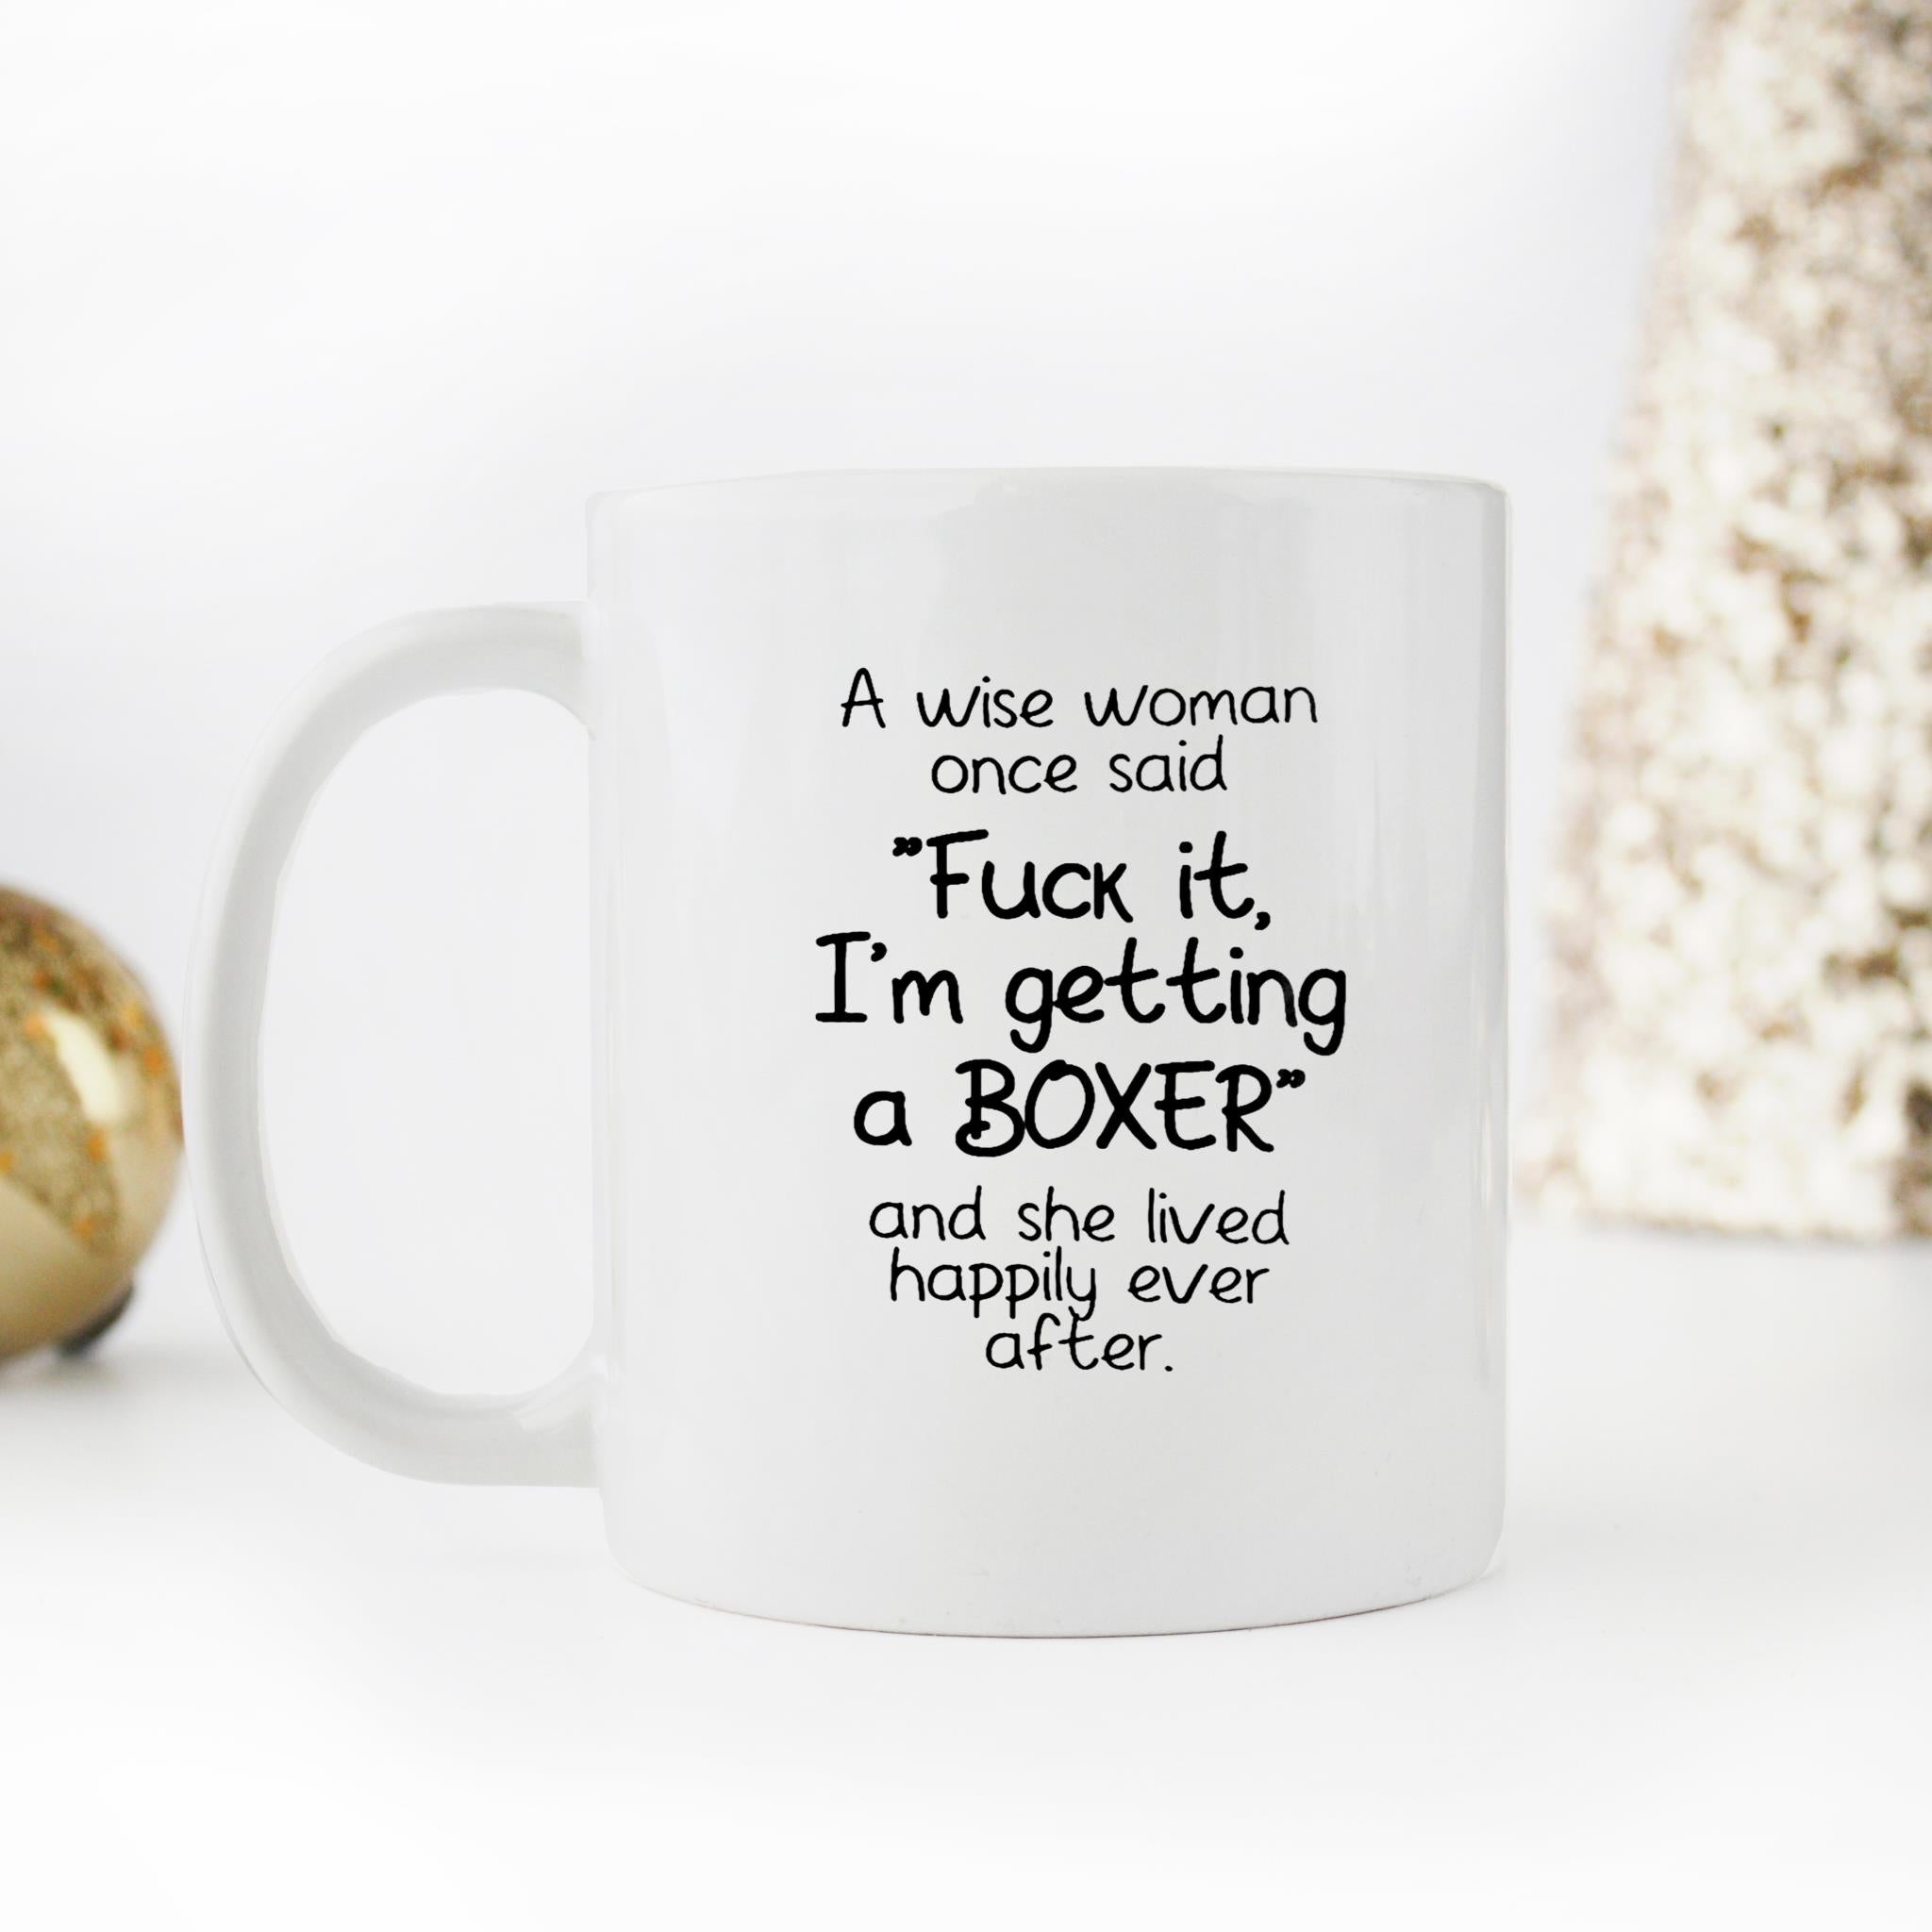 Skitongifts Funny Ceramic Novelty Coffee Mug A Wise Woman Once Said Mom Dad Funny Saying 3QeHKxh